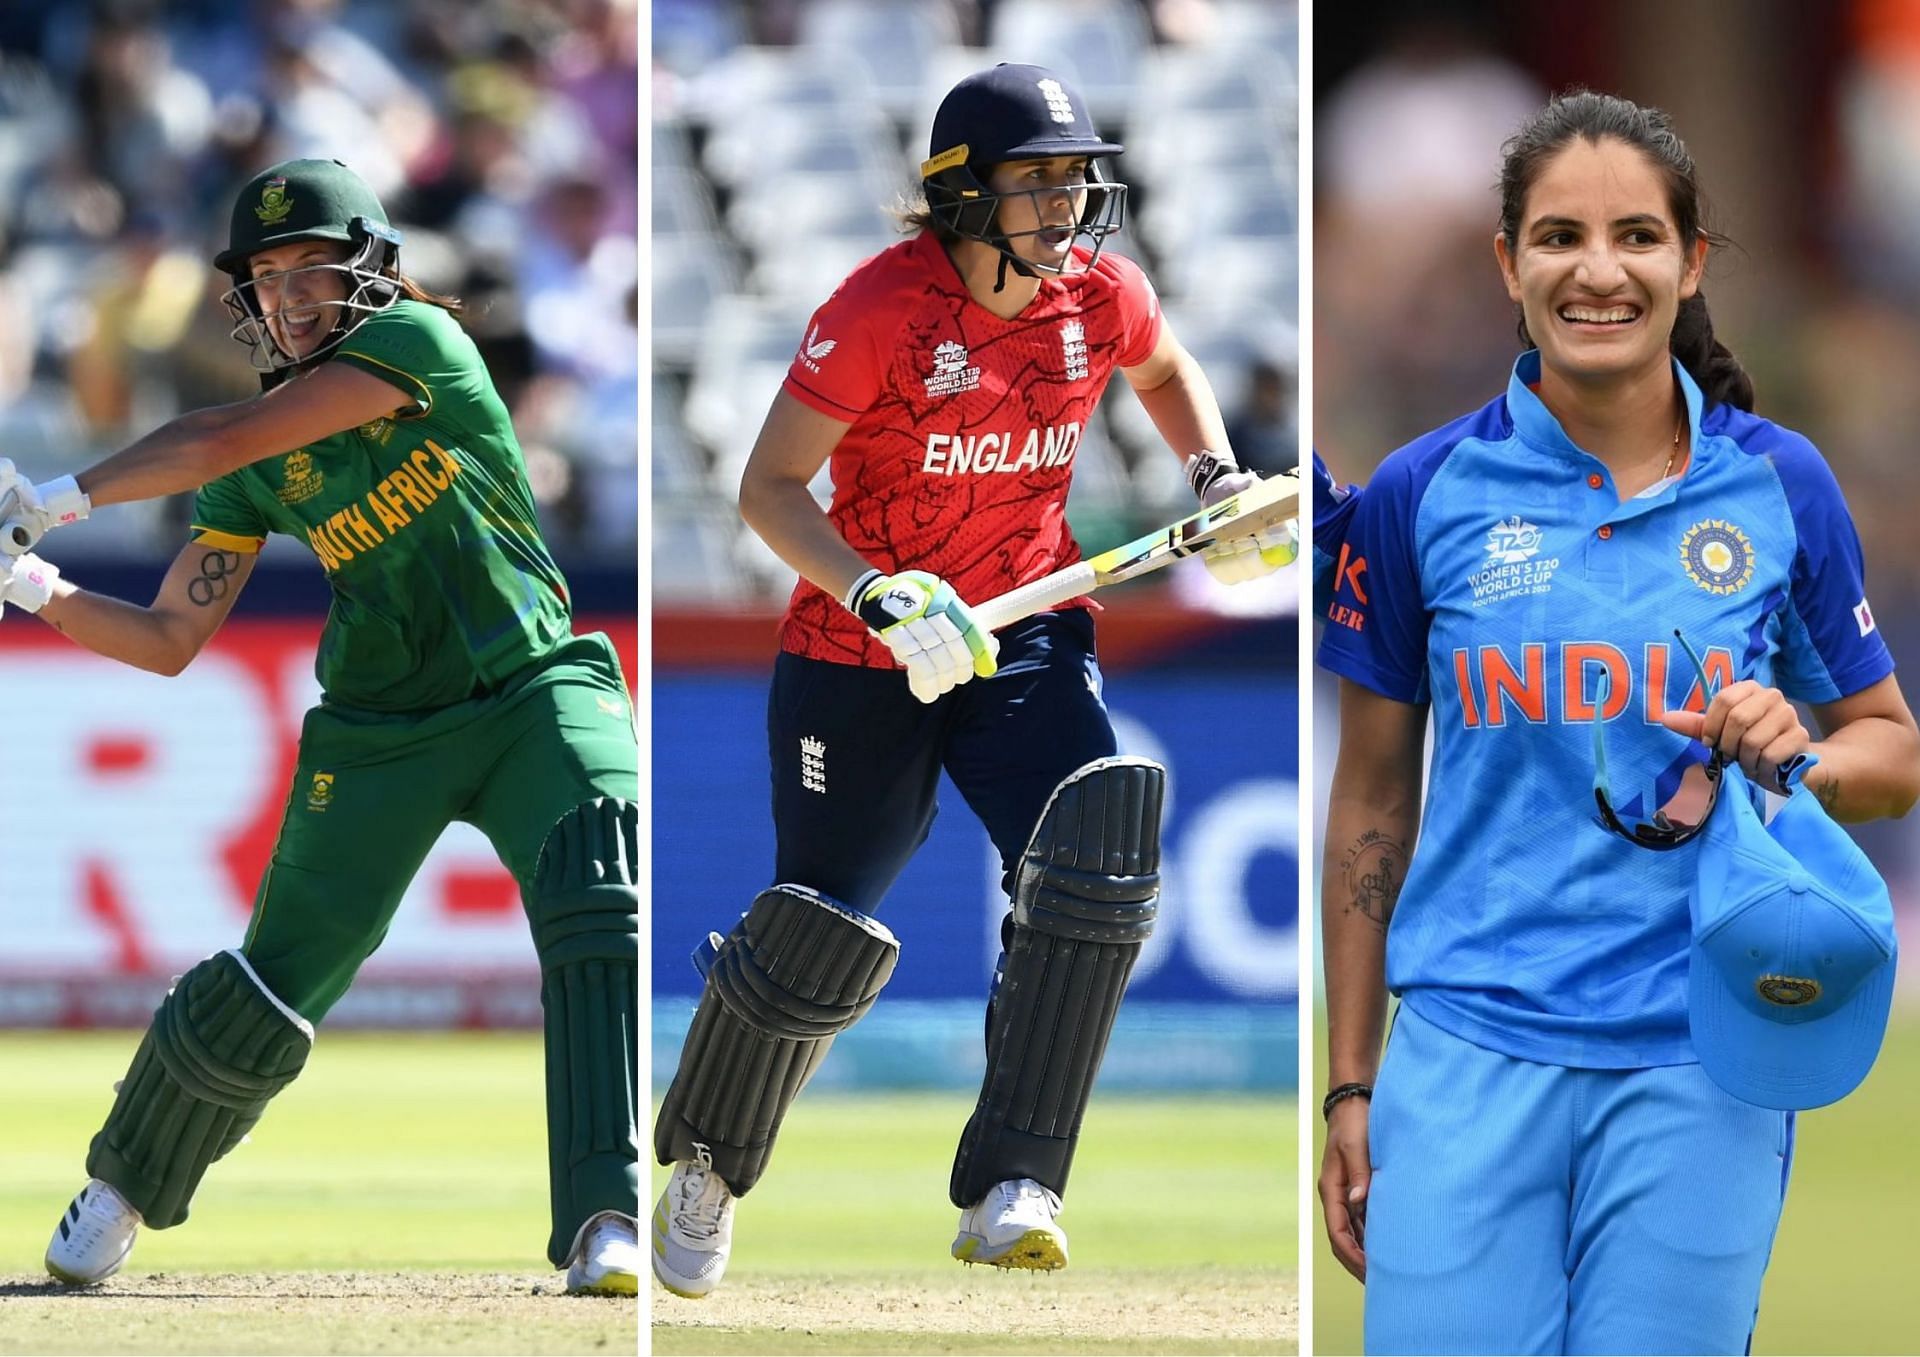 Tazmin Brits, Natalie Sciver-Brunt and Renuka Thakur all made their mark in the second week of the Women